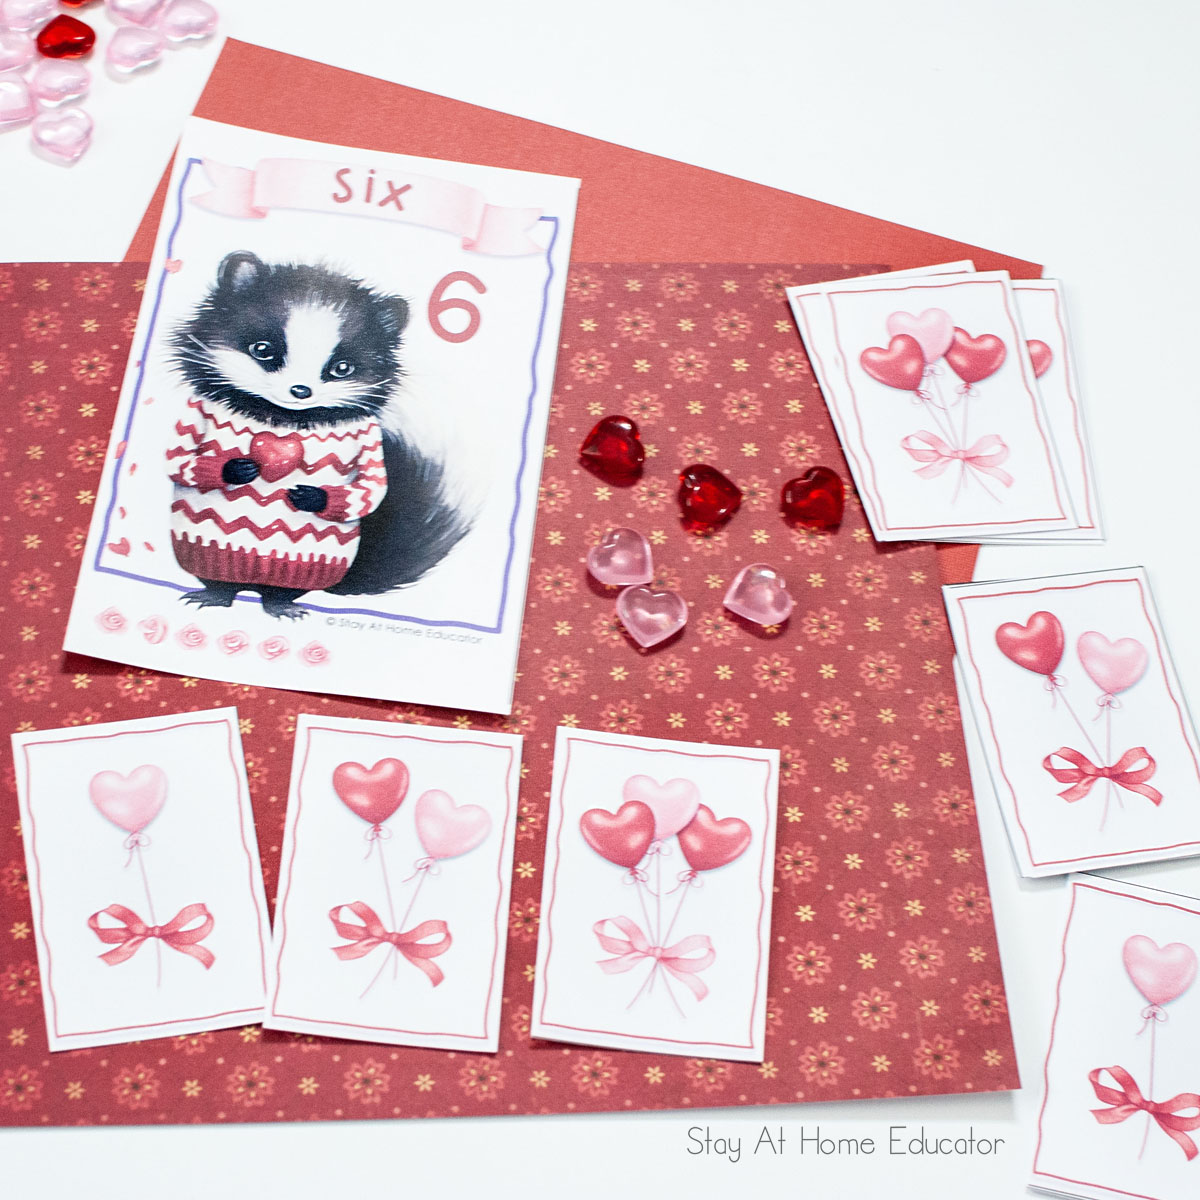 preschool math counting activities for preschool | Valentine's Day counting activity | addition for preschoolers | Valentine's activities for preschoolers | preschool math lesson plan ideas | counting to six using number one, two, and three